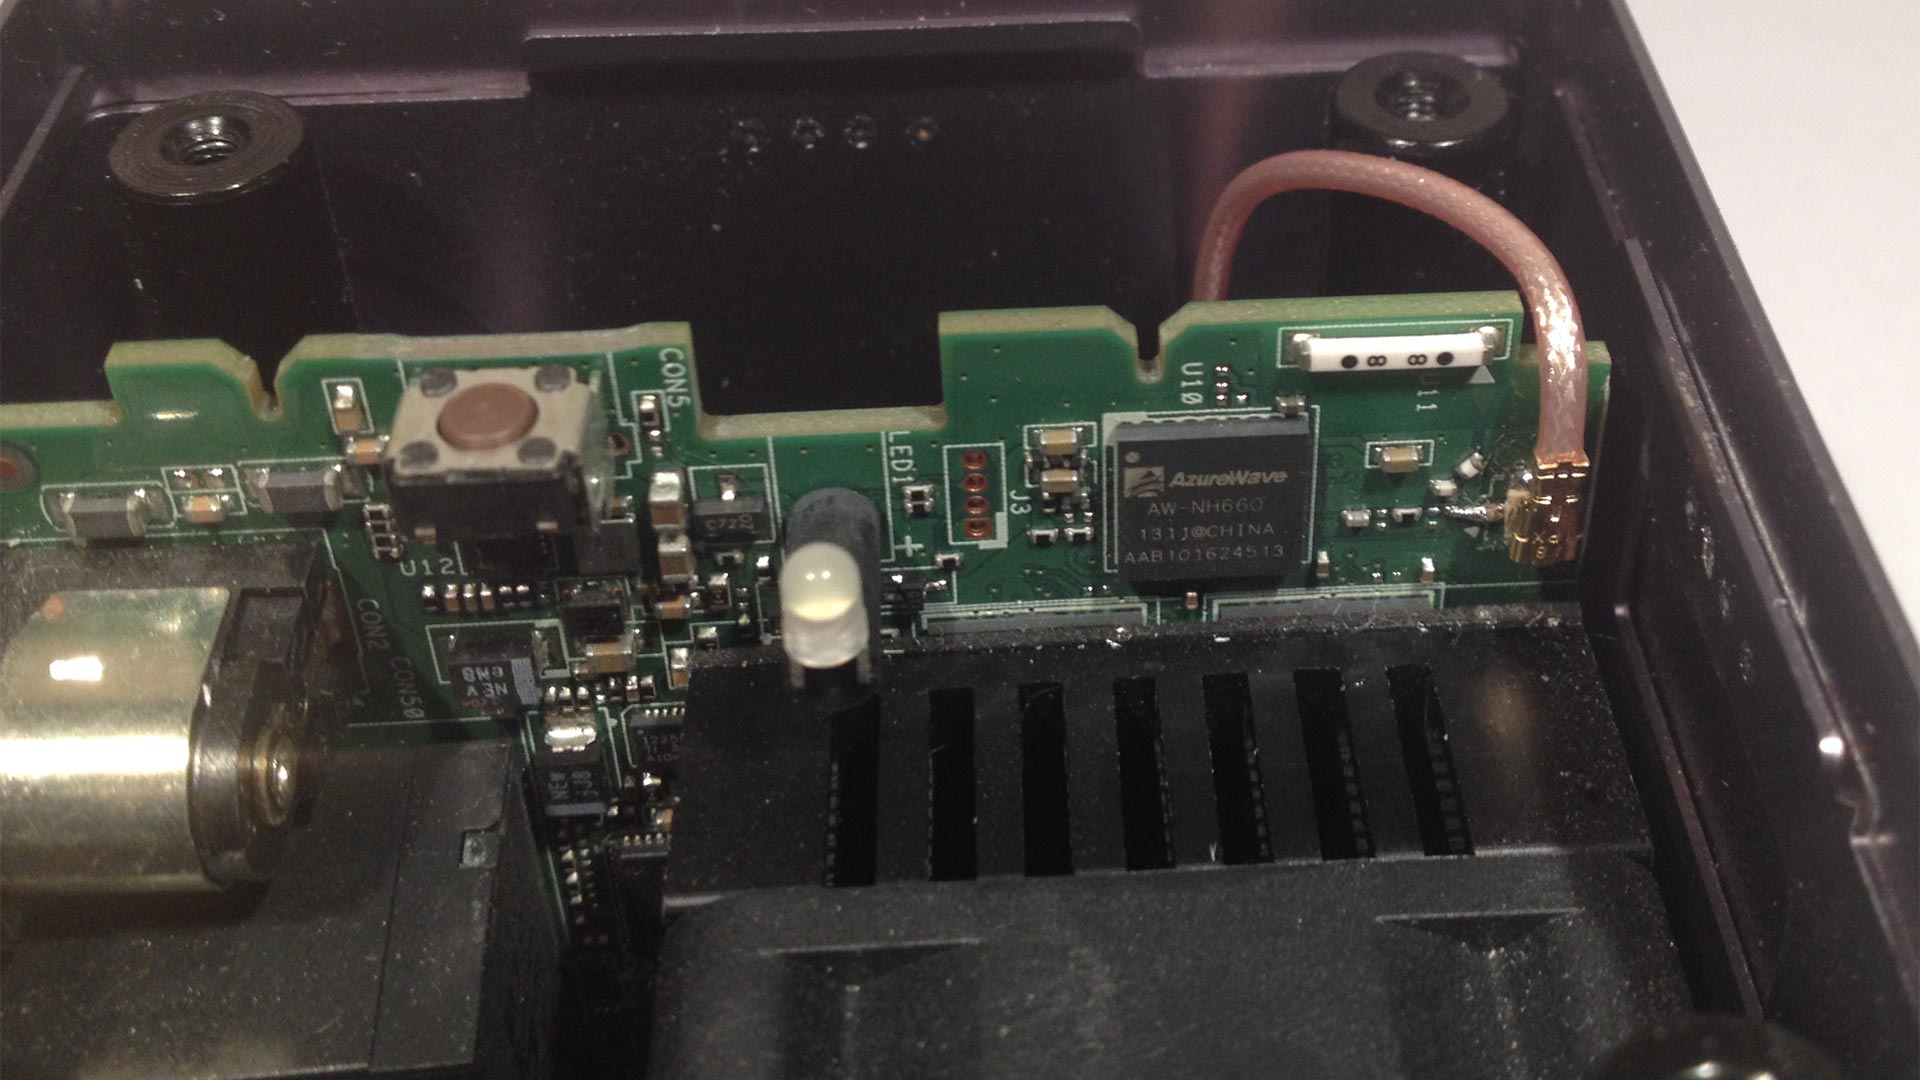 Ouya motherboard re-installation with U.FL Connector plugged in.